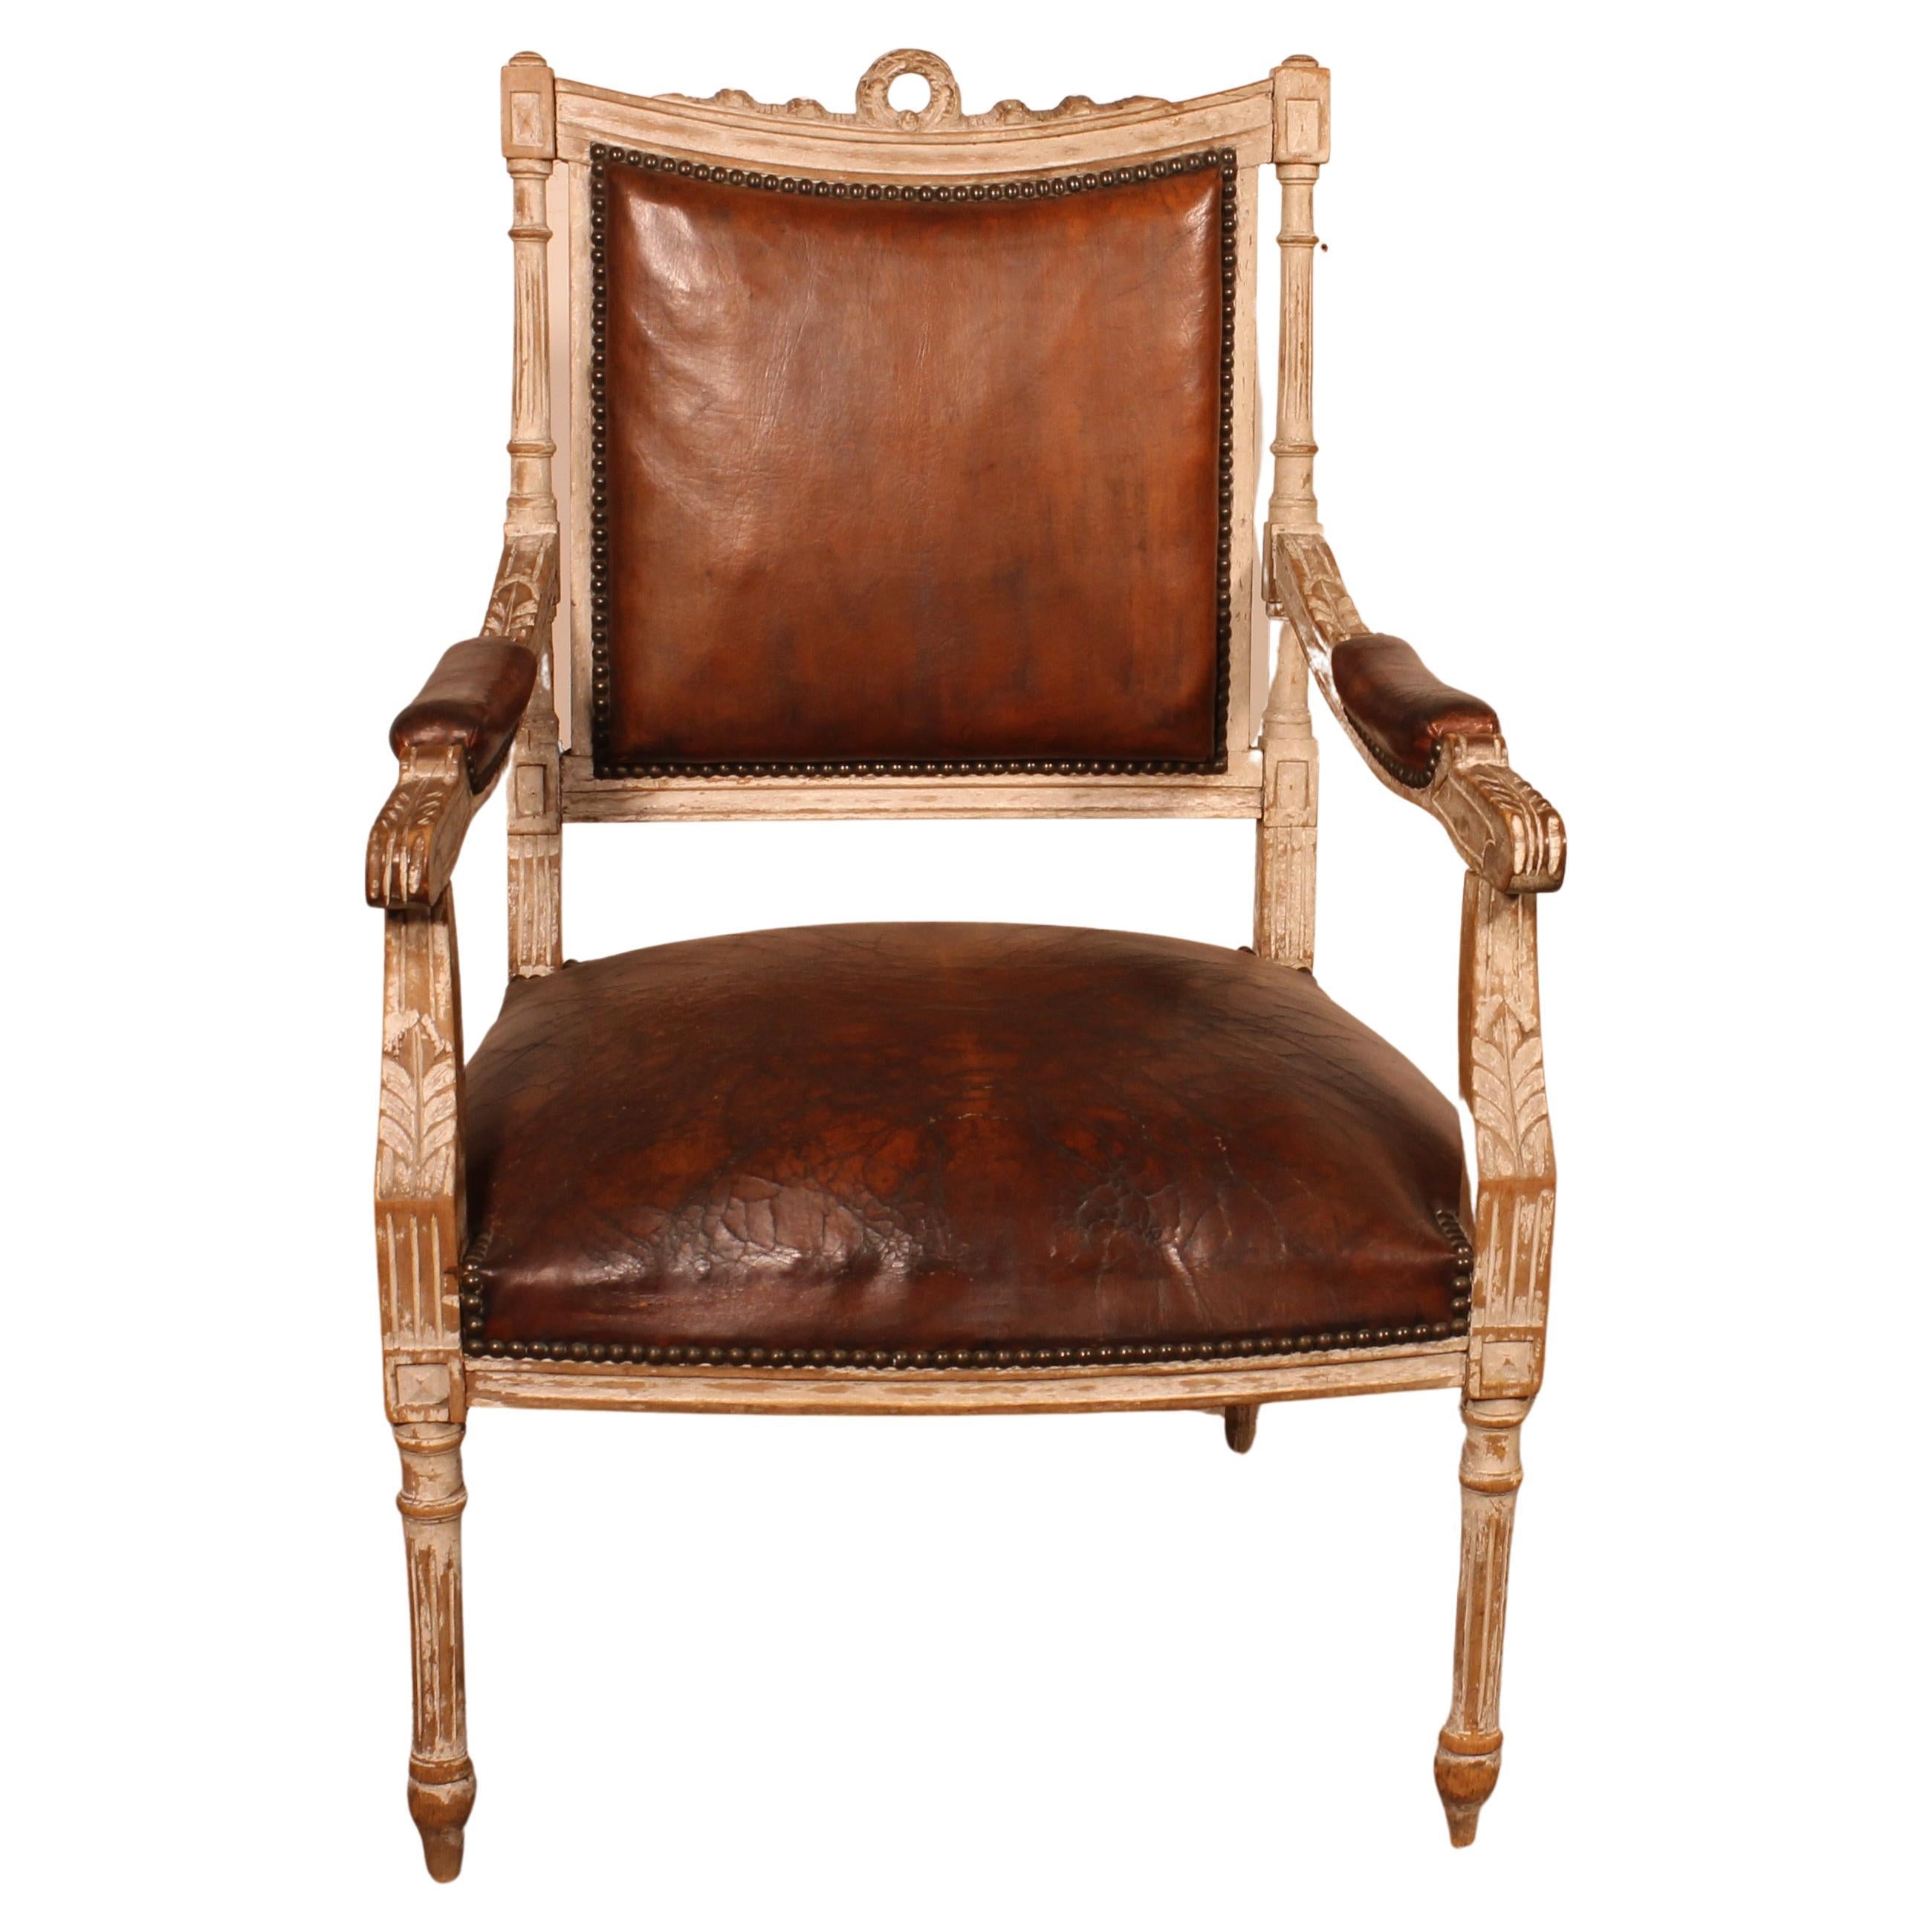 Louis XVI Armchair in Polychrome Wood, 18th Century For Sale